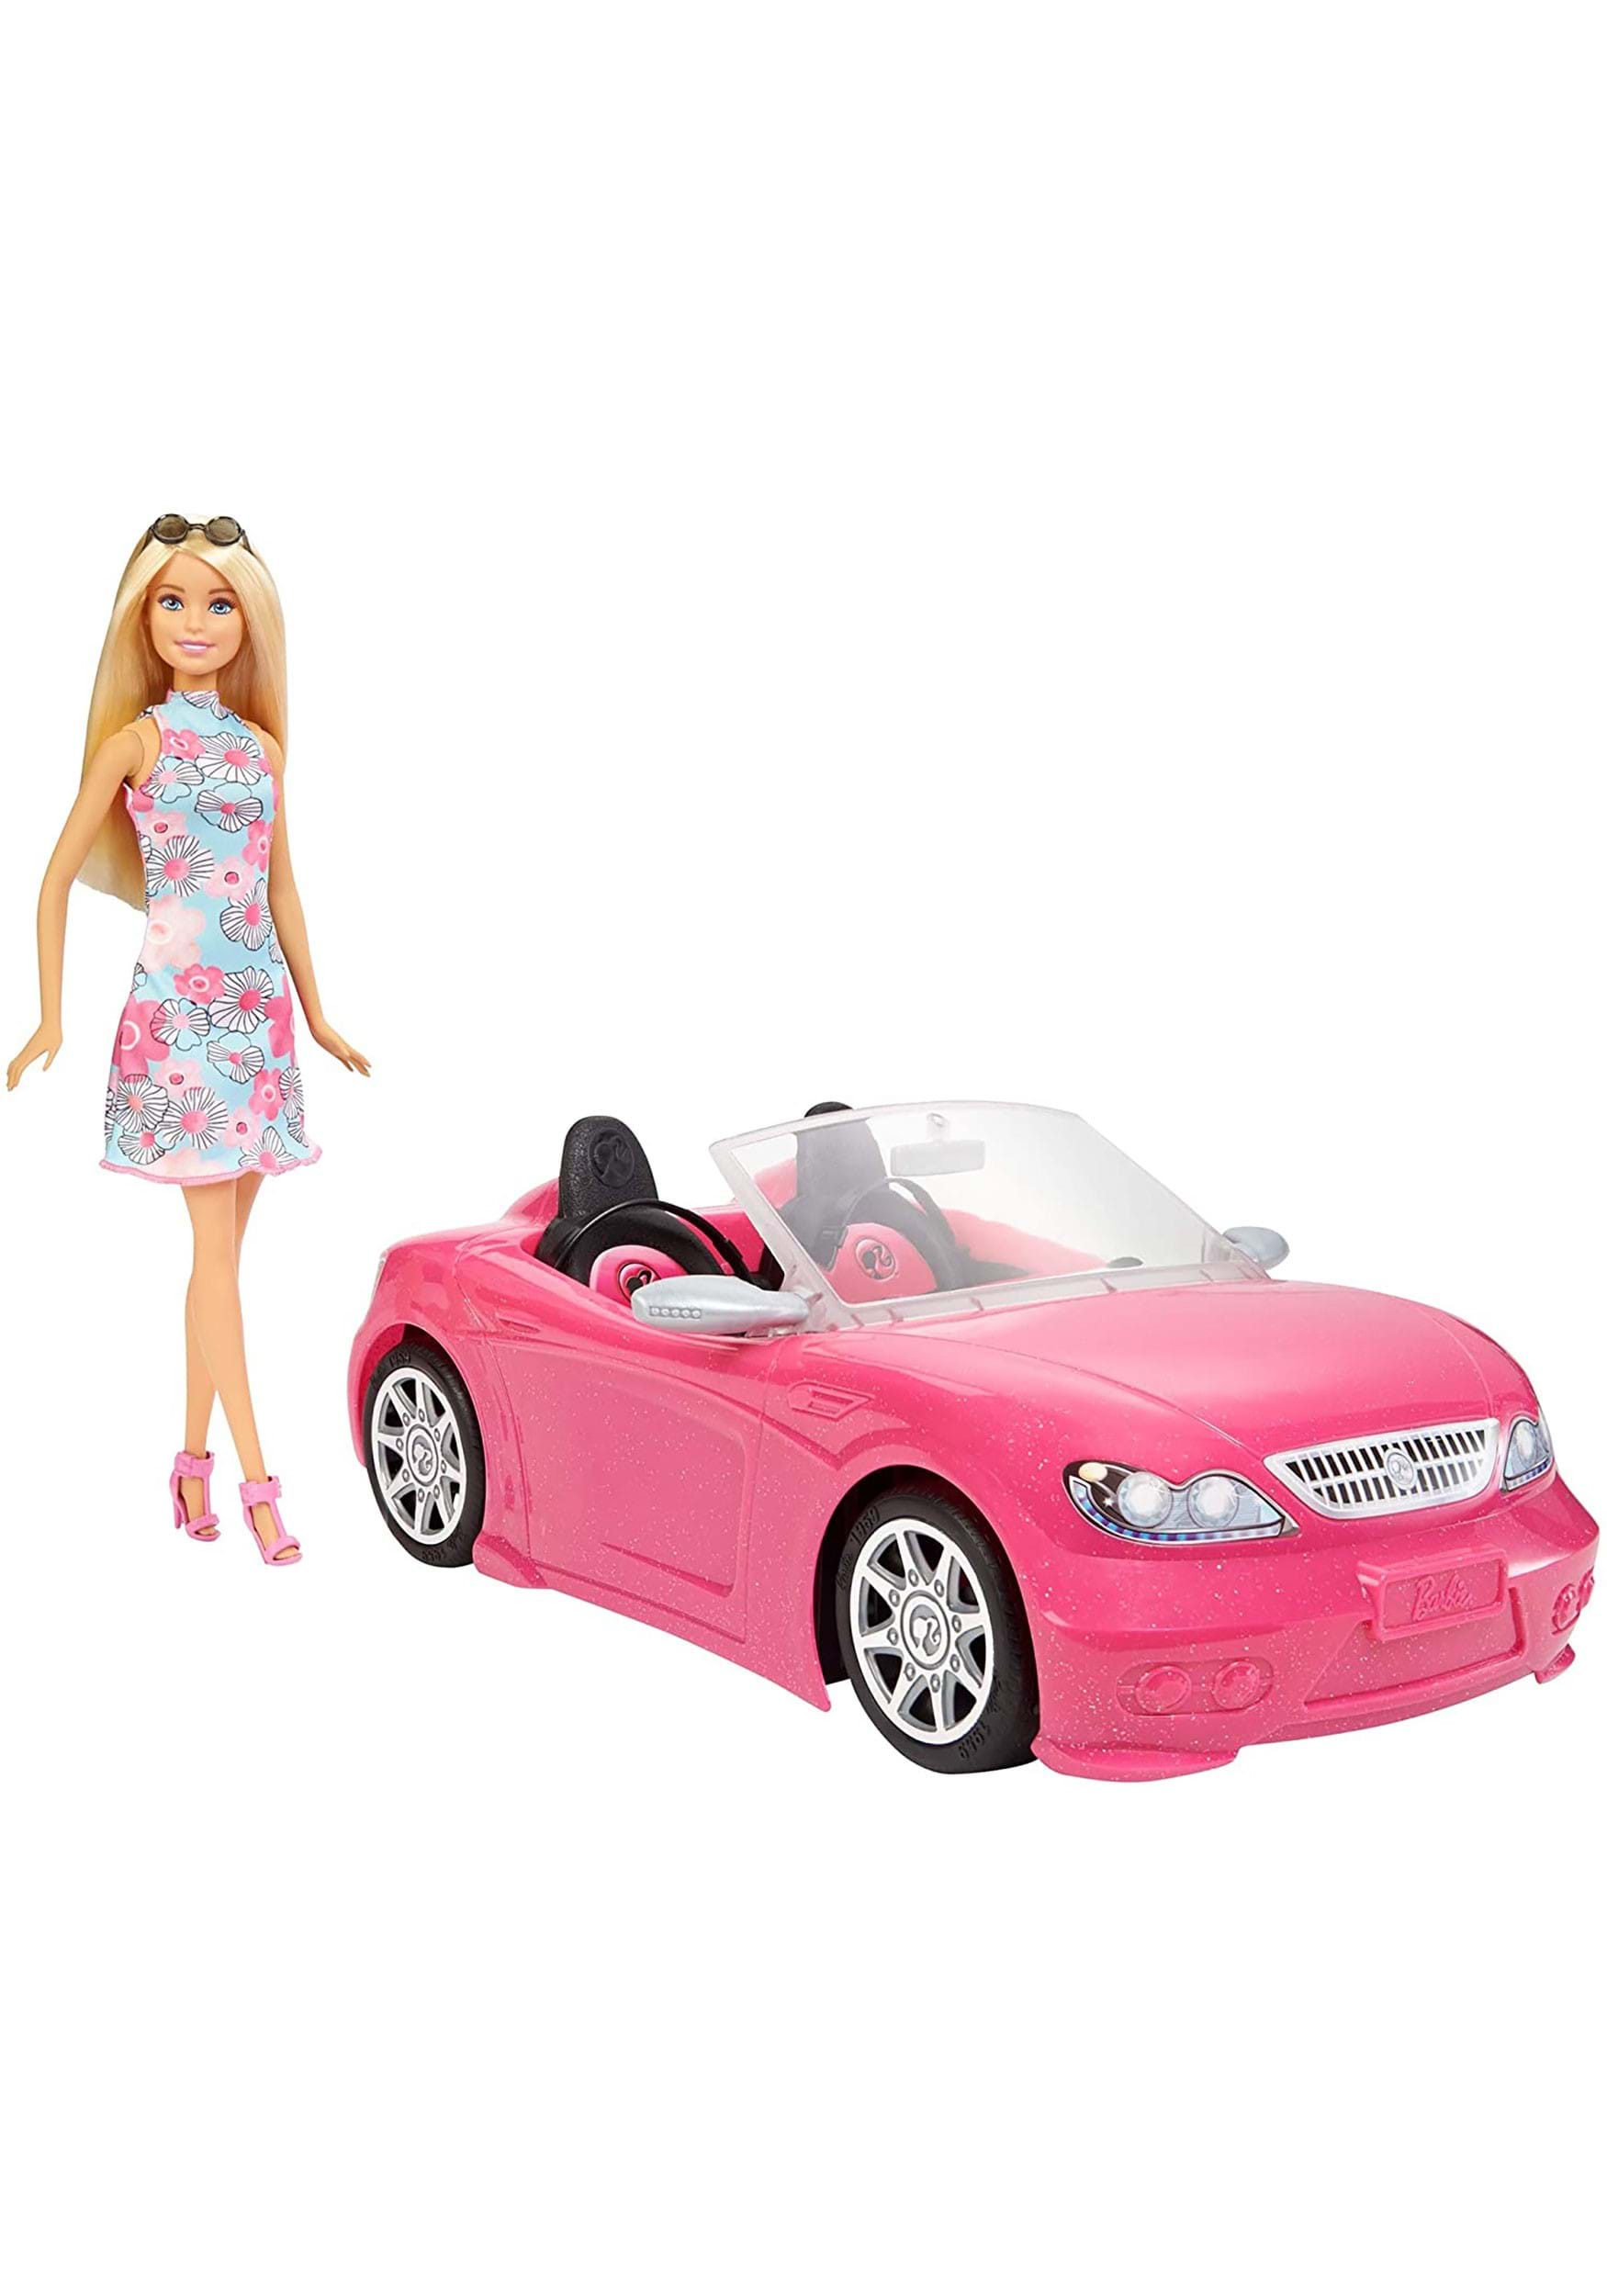 Barbie Doll & Convertible